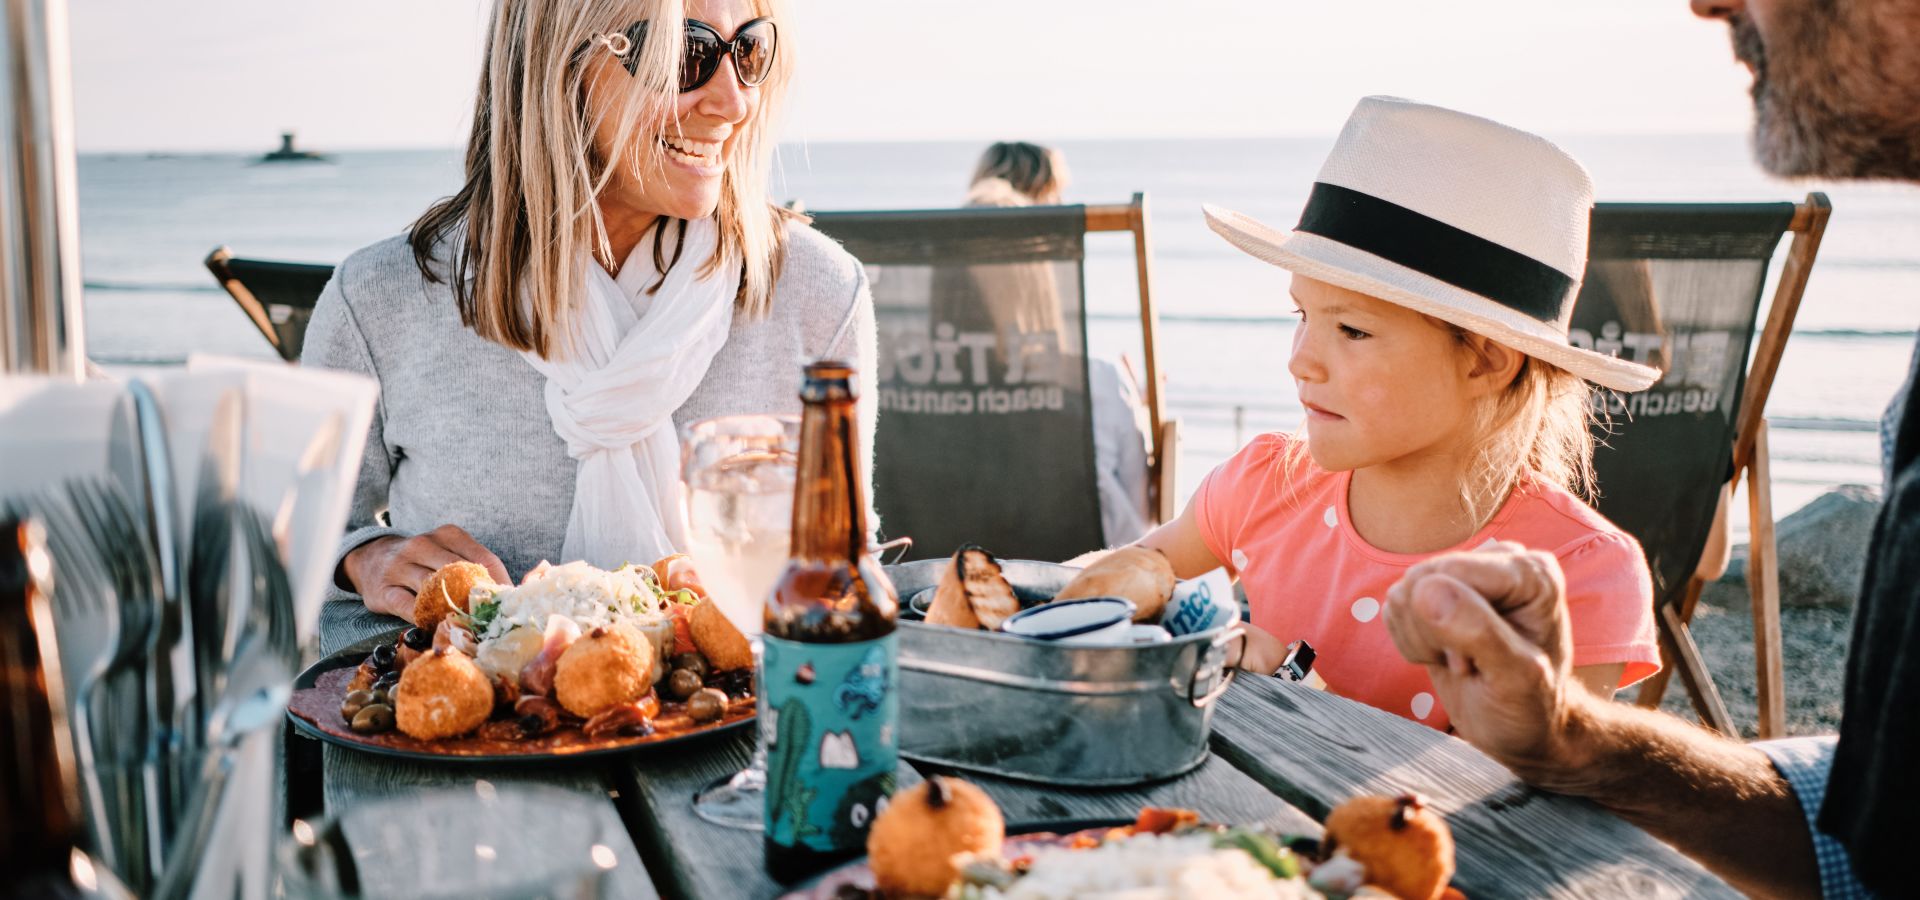 Couple with young child enjoying al fresco dining in the sun overlooking the sea